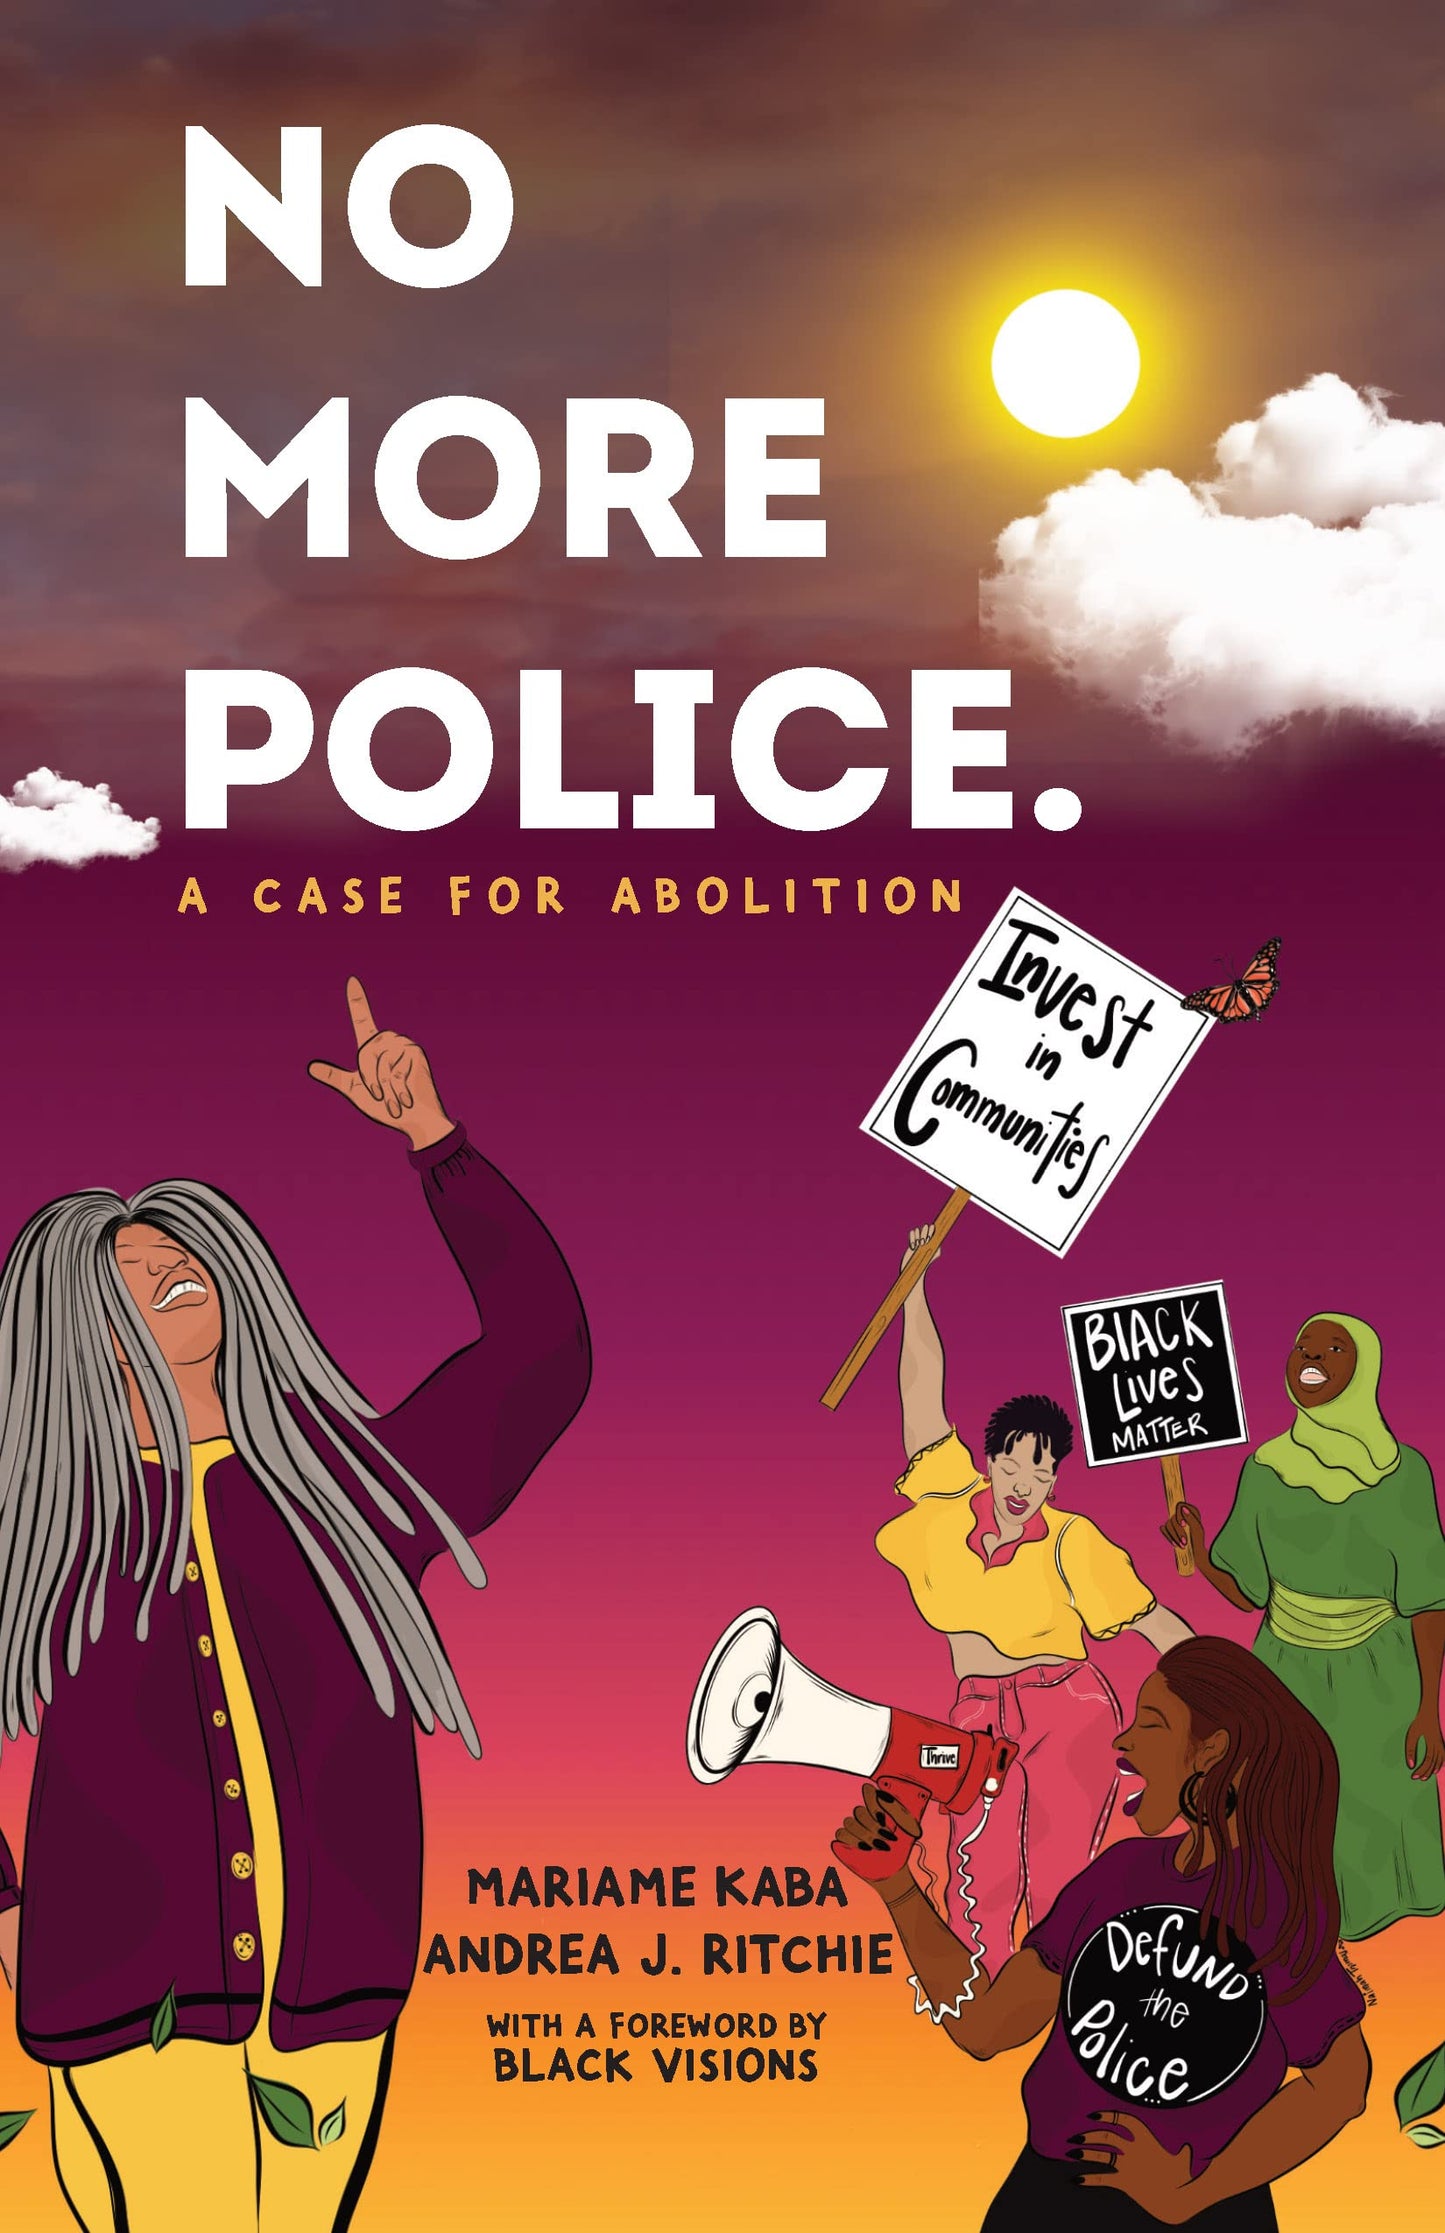 No More Police // A Case for Abolition